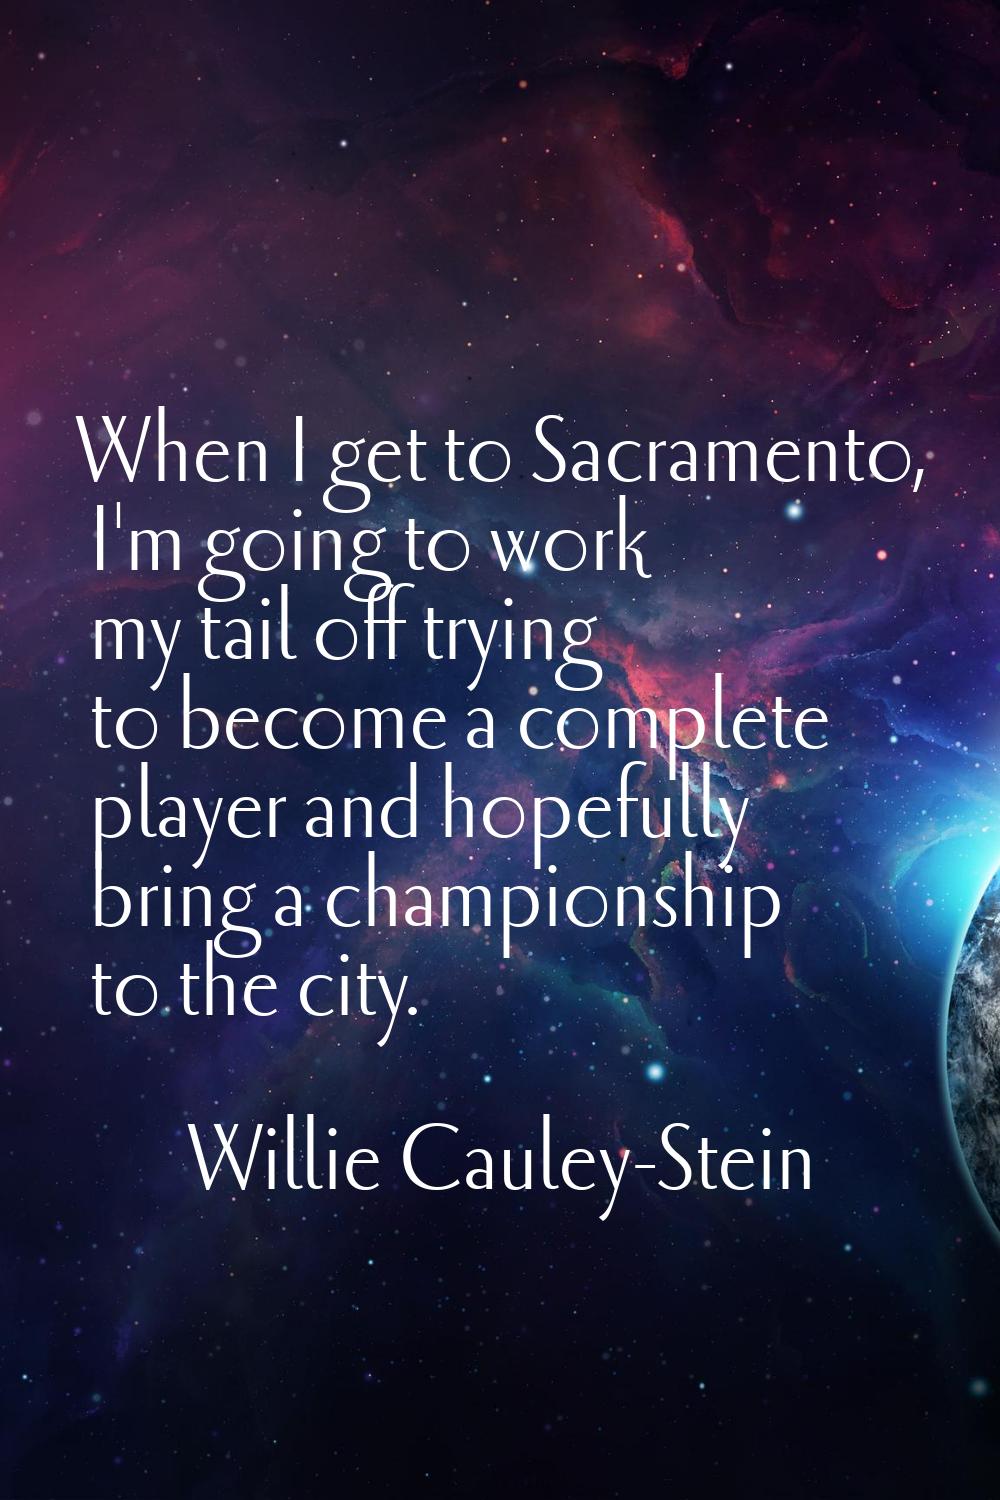 When I get to Sacramento, I'm going to work my tail off trying to become a complete player and hope